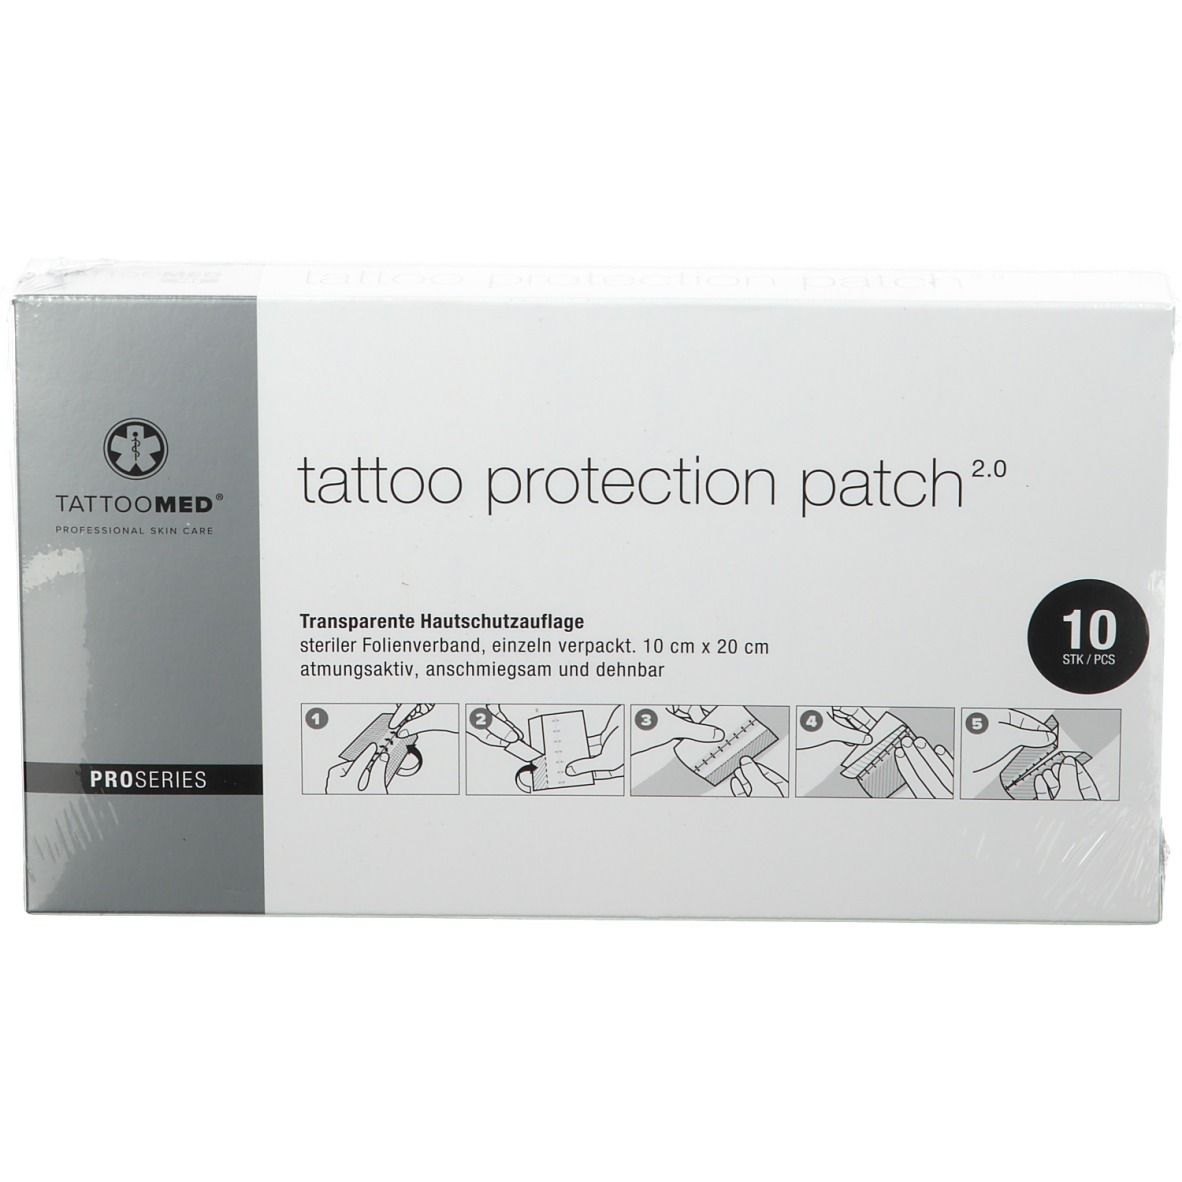 TattooMed® Tattoo Protection Patch 2.0 10 x 20 cm